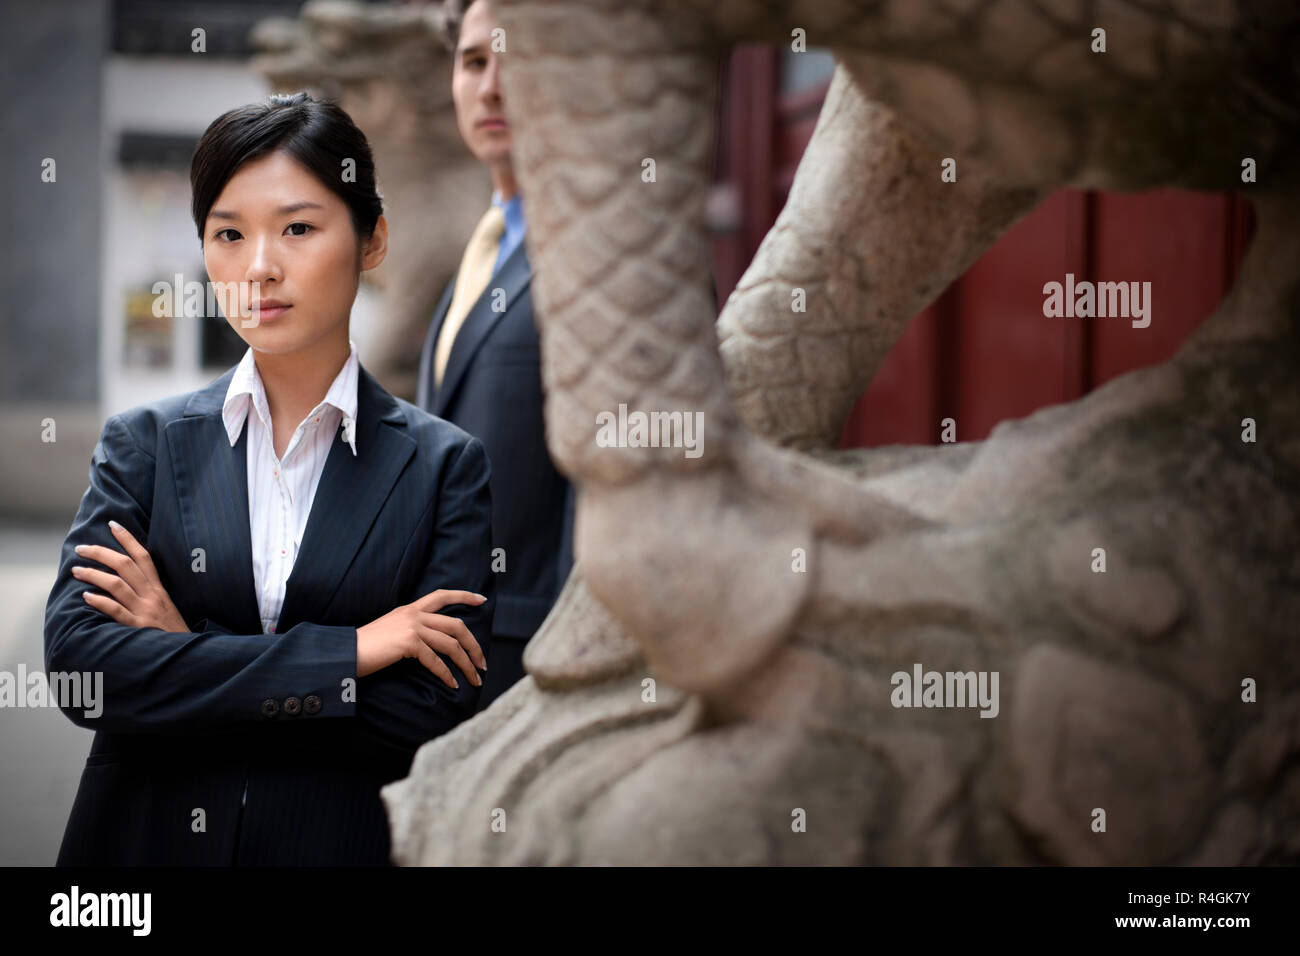 Portrait of a young businesswoman standing with her arms crossed in front of a male colleague. Stock Photo